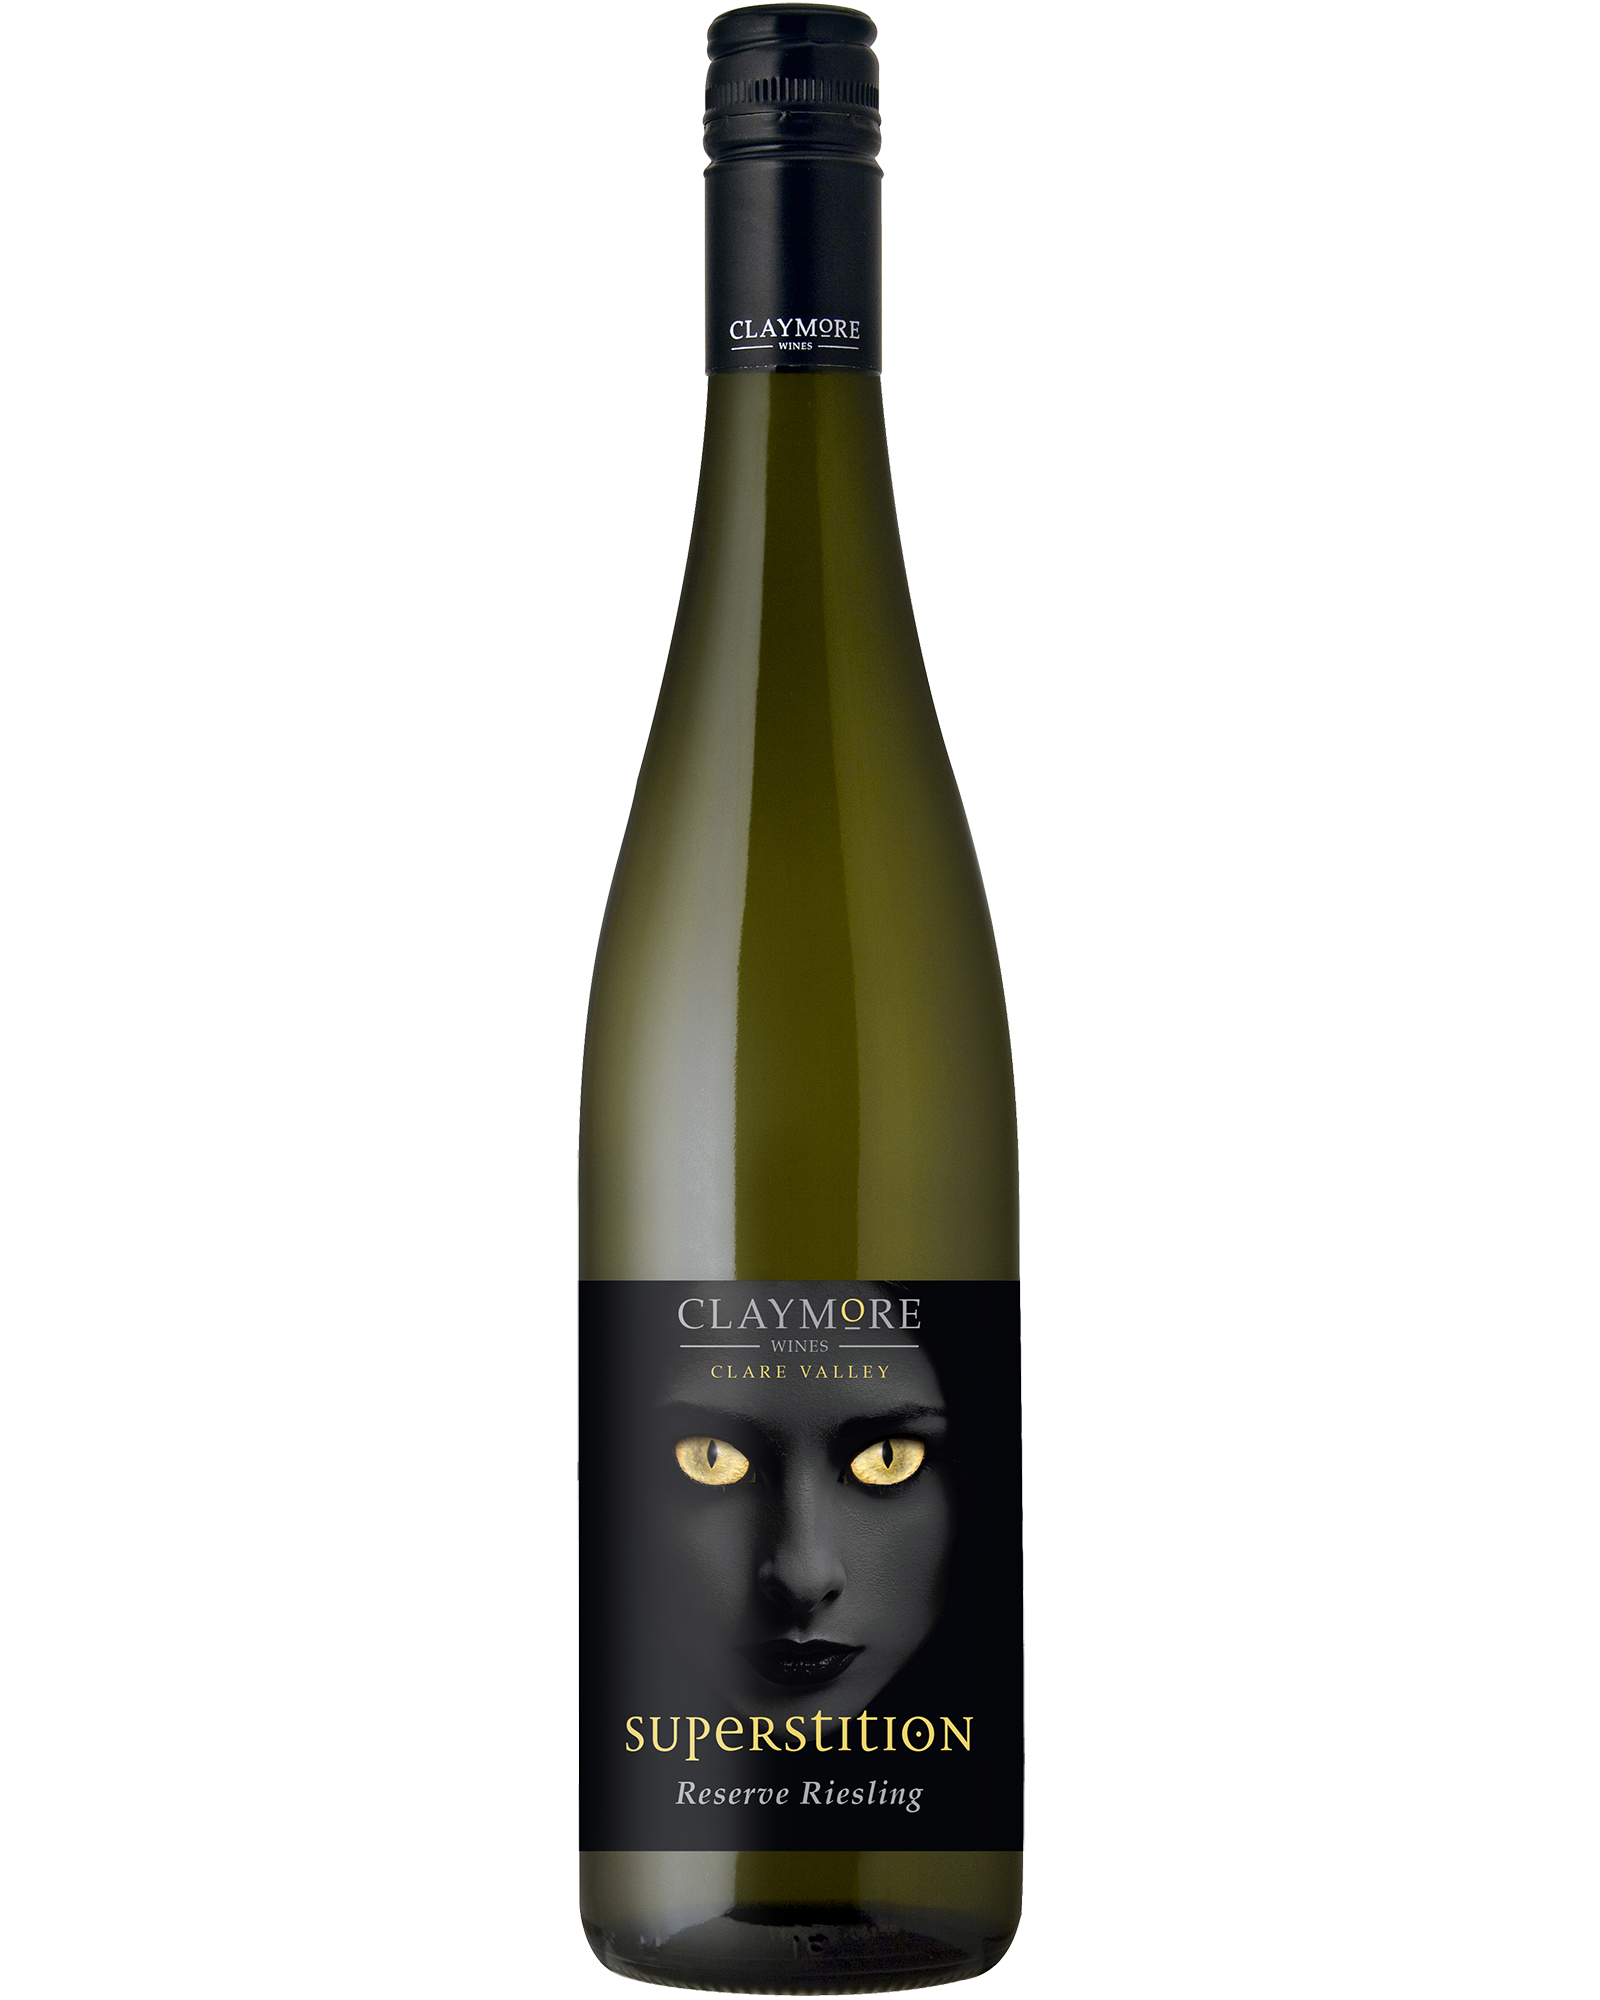 Claymore Superstition Reserve Riesling